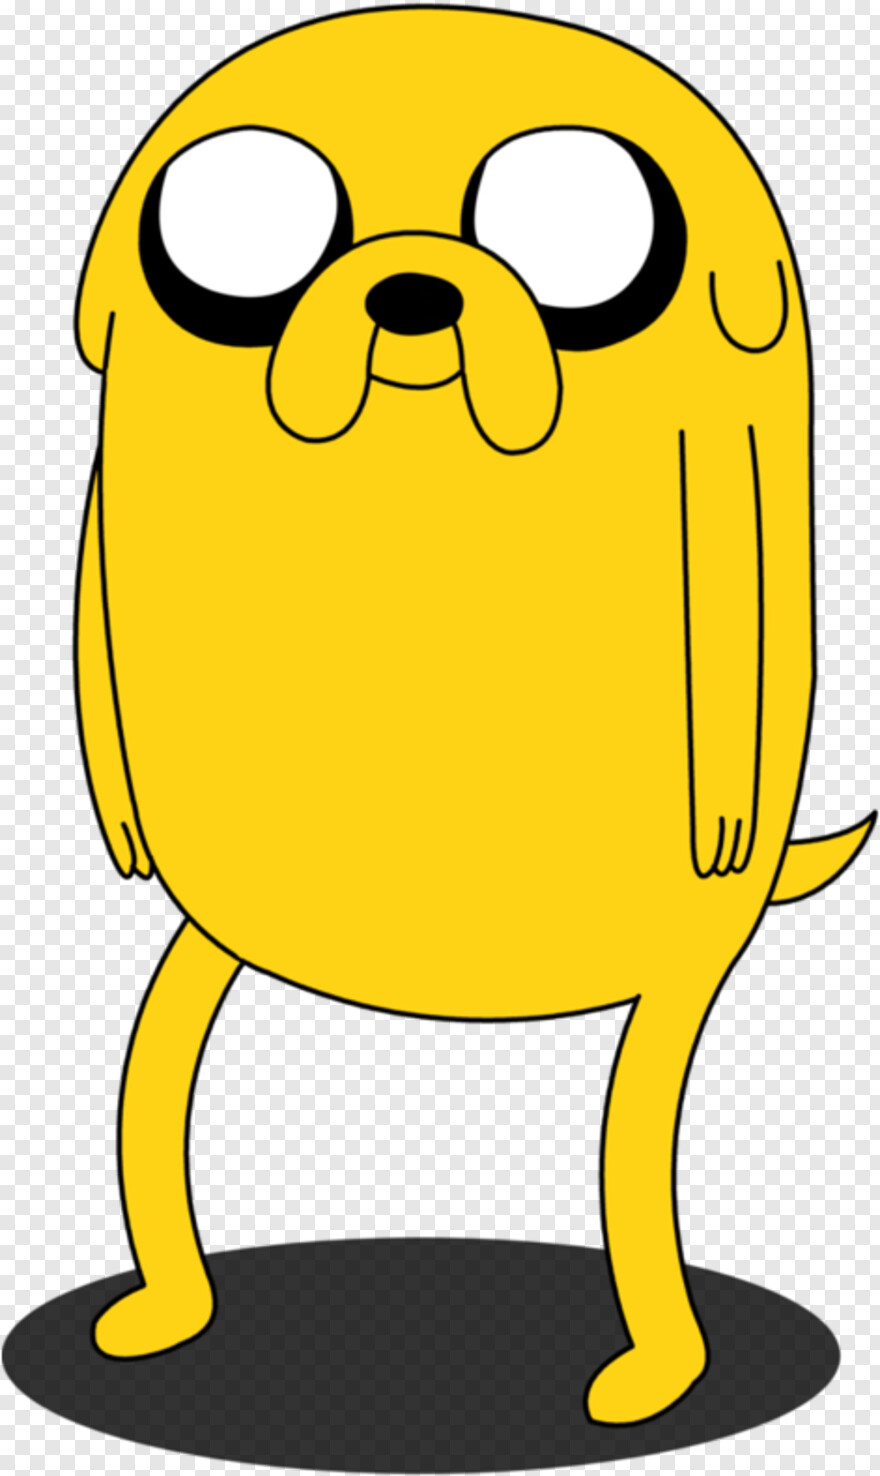 Jake Paul, Adventure Time Logo, Funny Dog, Dog Paw Print, Adventure Time,  Hot Dog #561043 - Free Icon Library